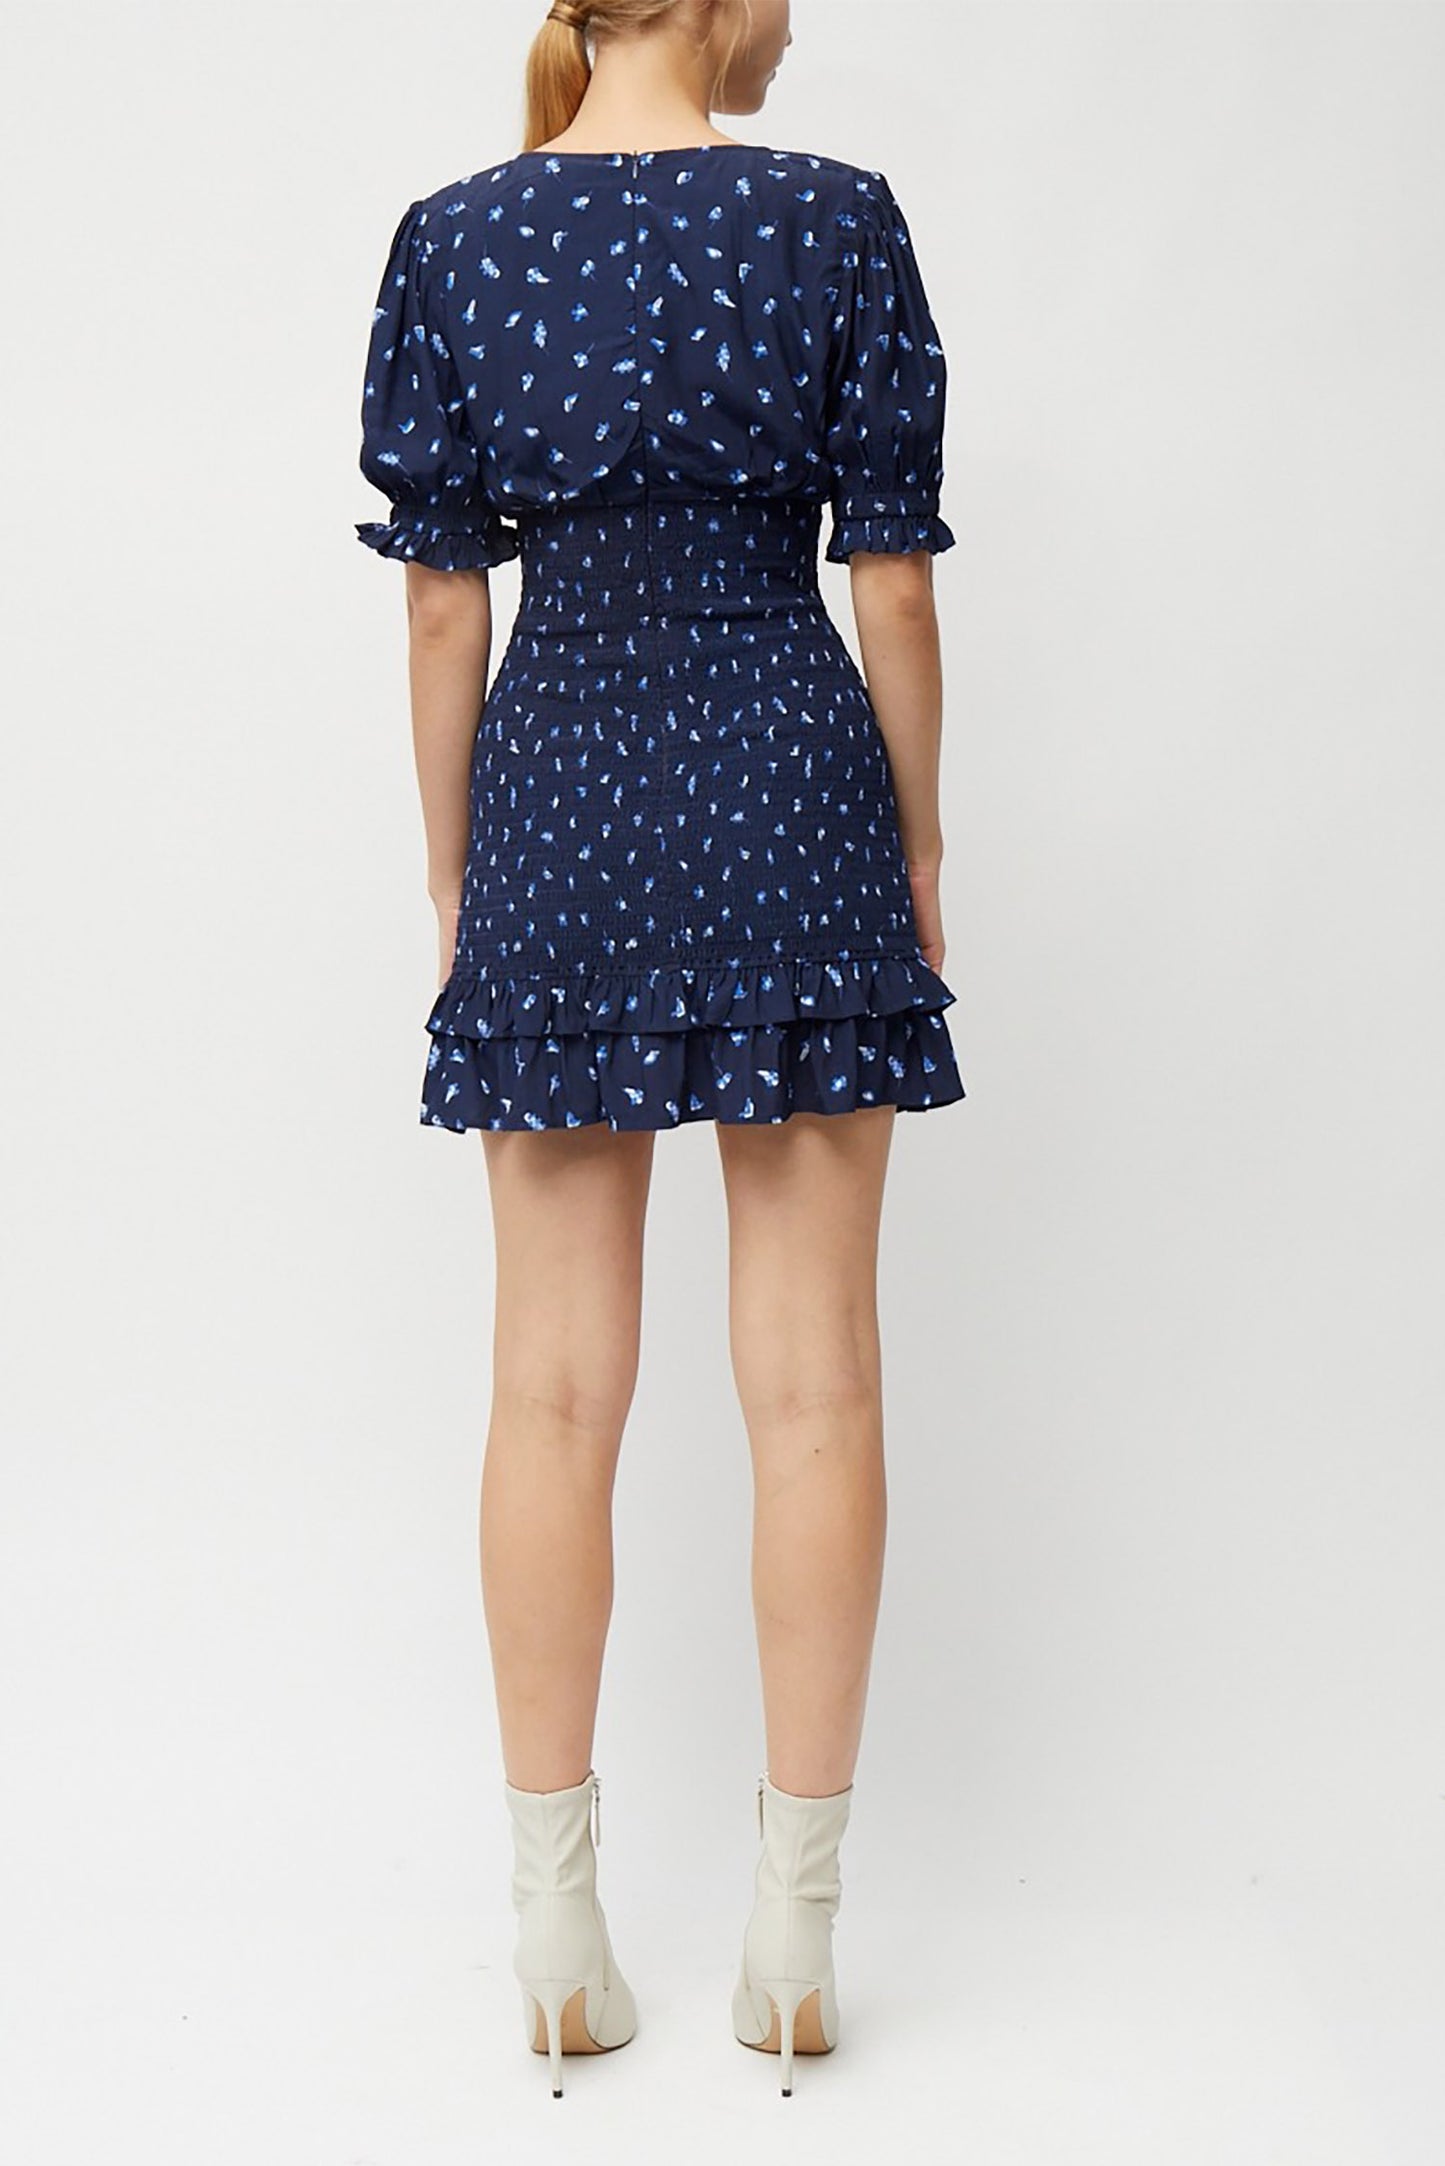 Bhelle Collette Smock Dress - French Connection